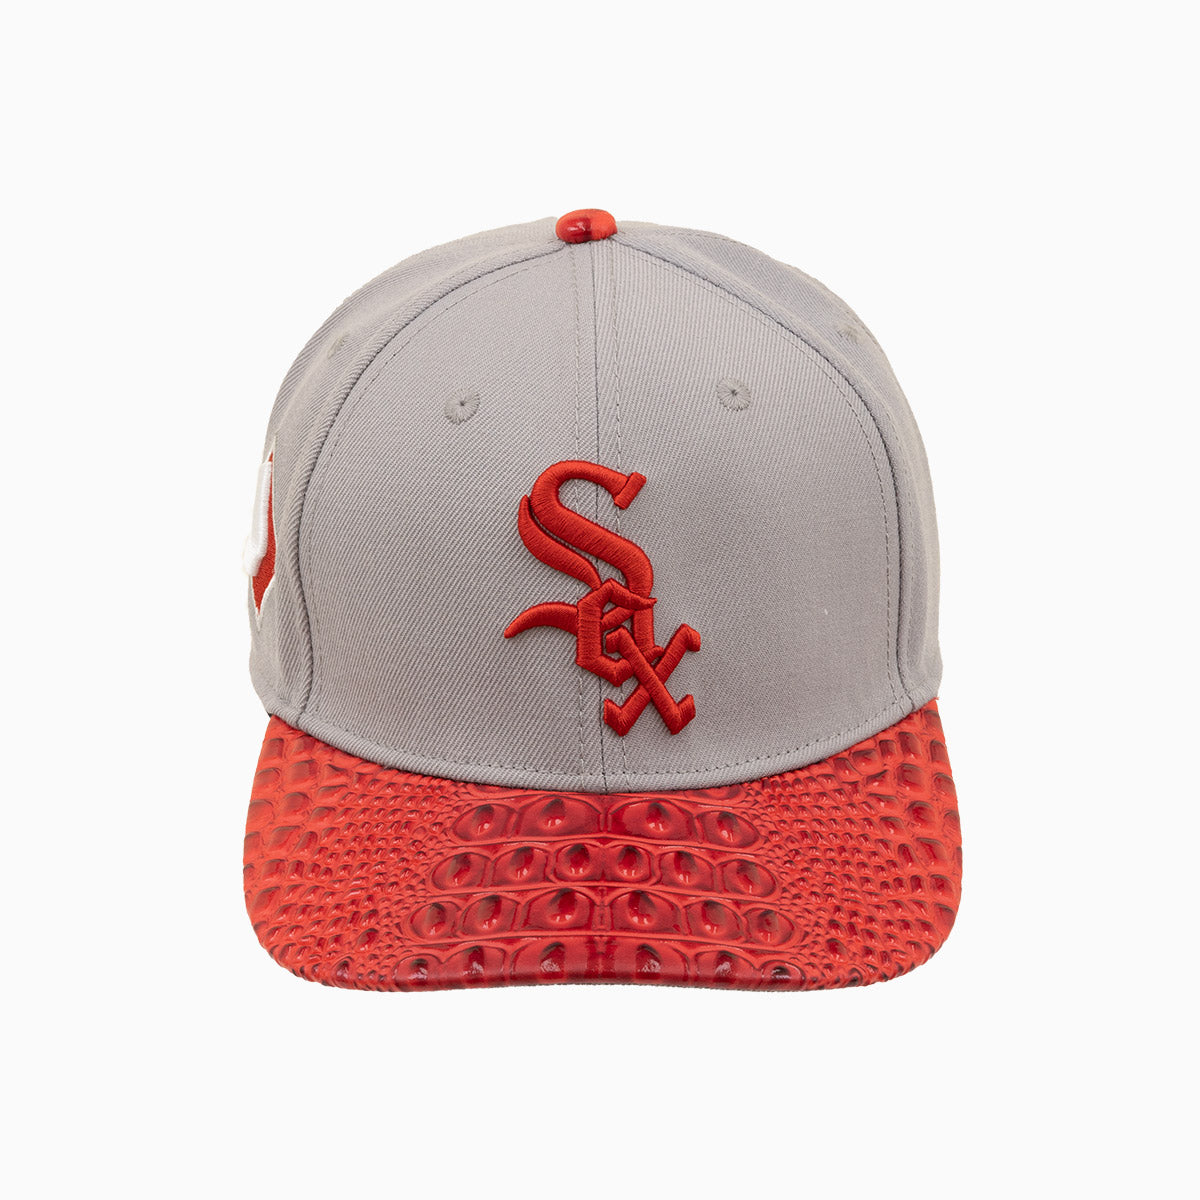 pro-standard-chicago-white-sox-mlb-leather-visor-flat-hat-lcw736178-gry